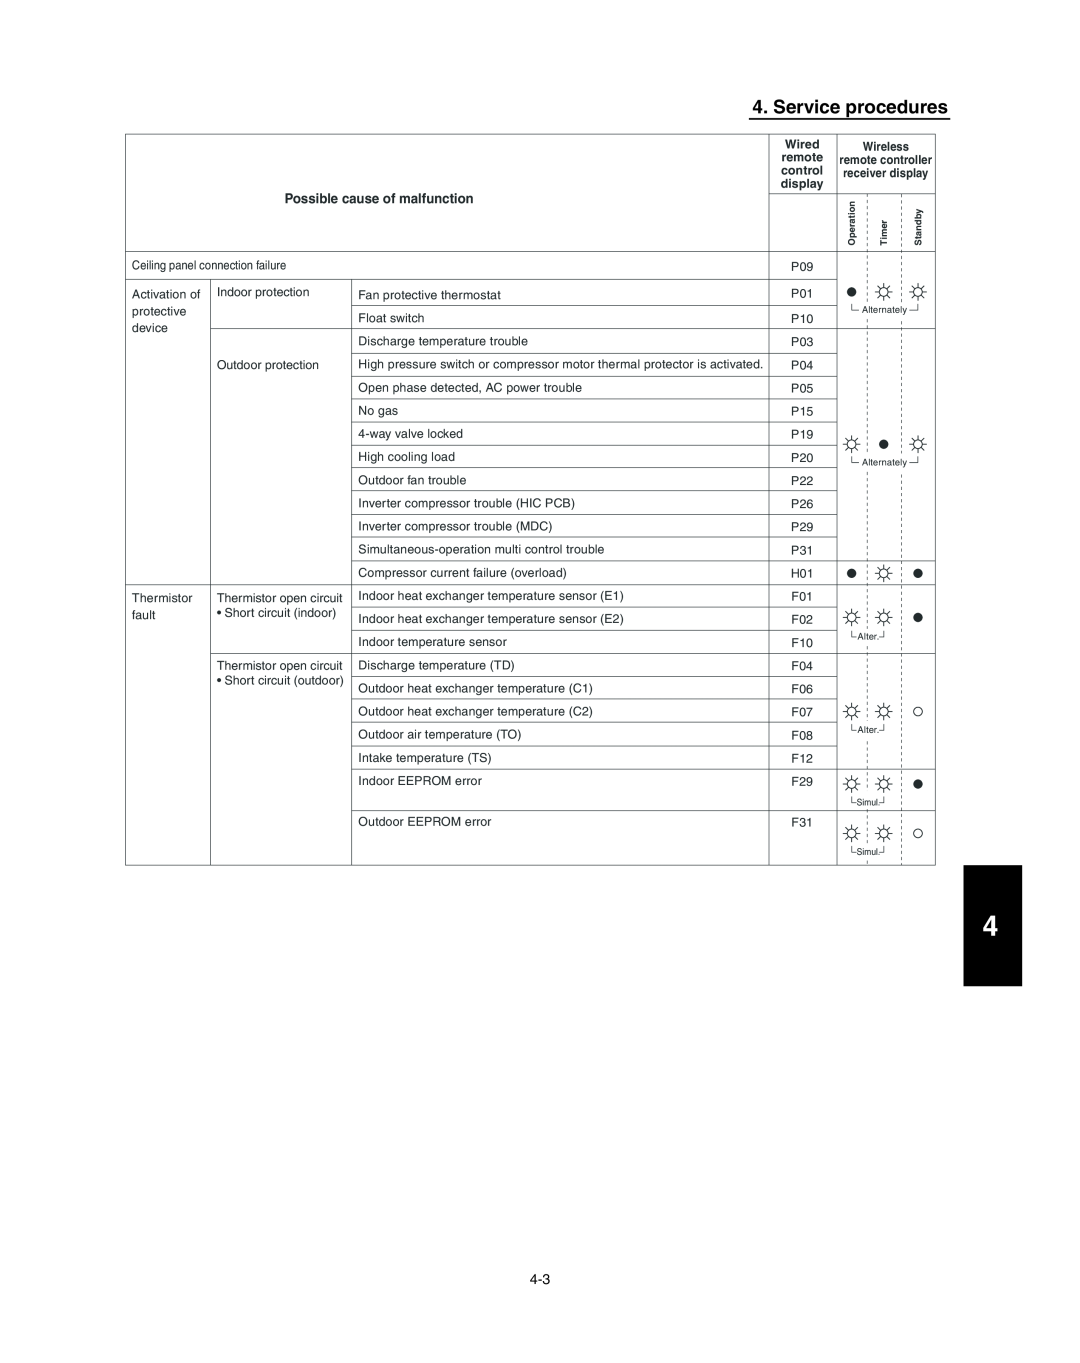 Panasonic R410A service manual Service procedures, Wired, remote, control, display, Wireless 